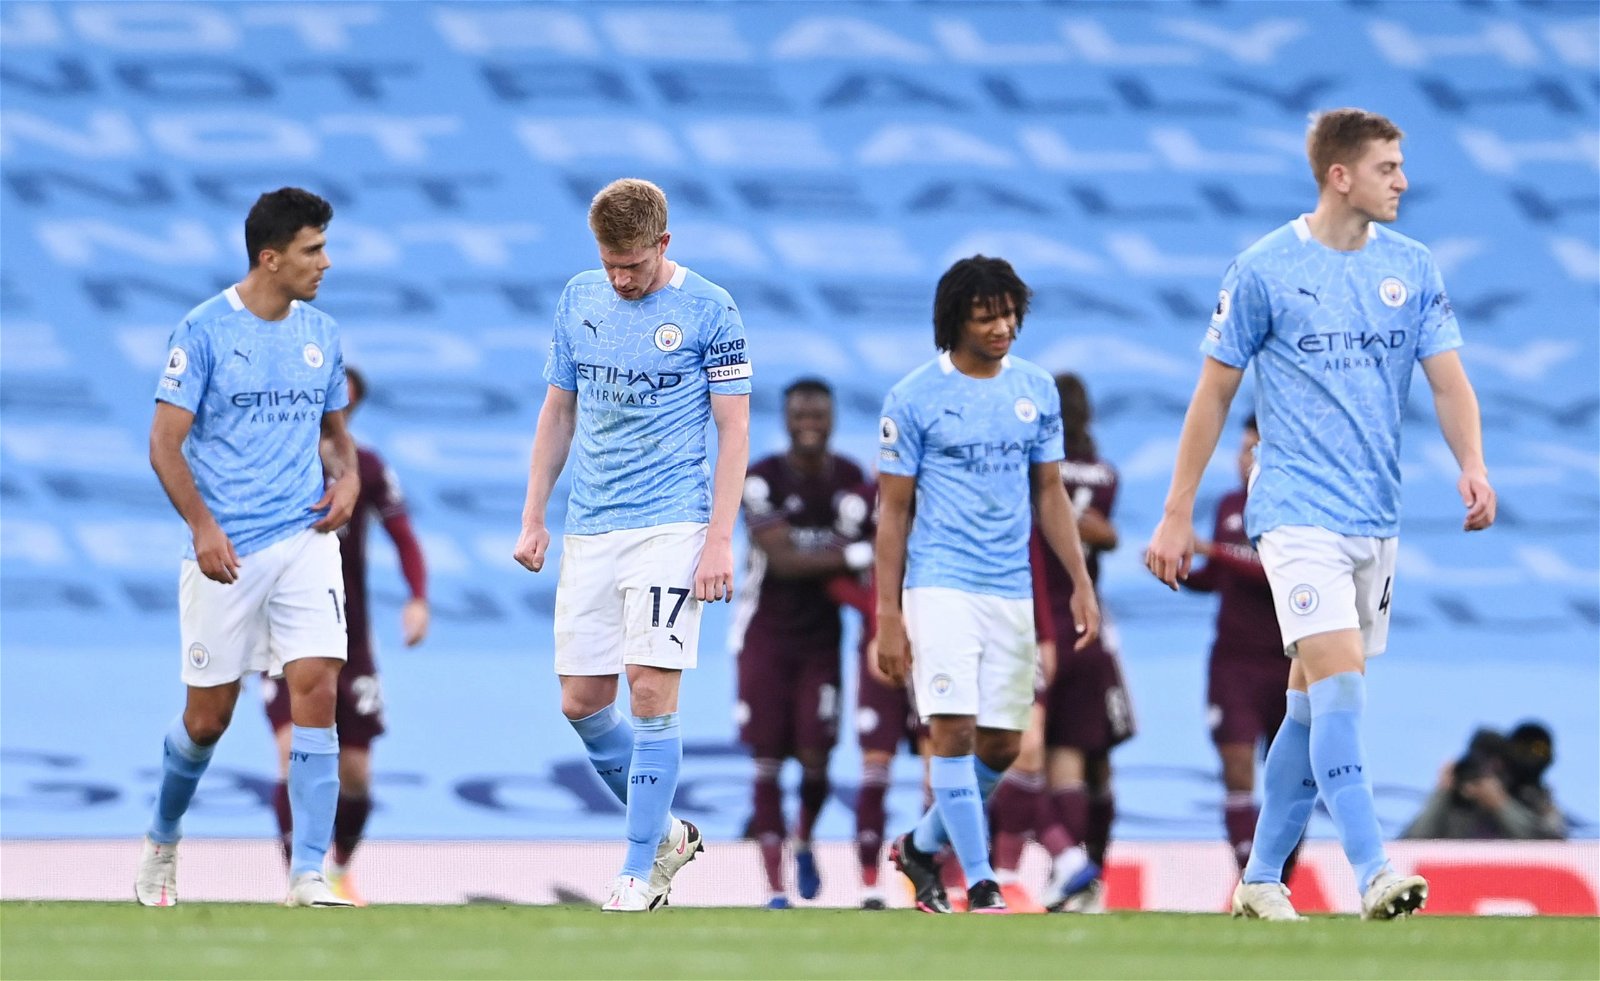 Manchester City biggest loss & defeat ever - worst Man City defeat / loss ever in history!